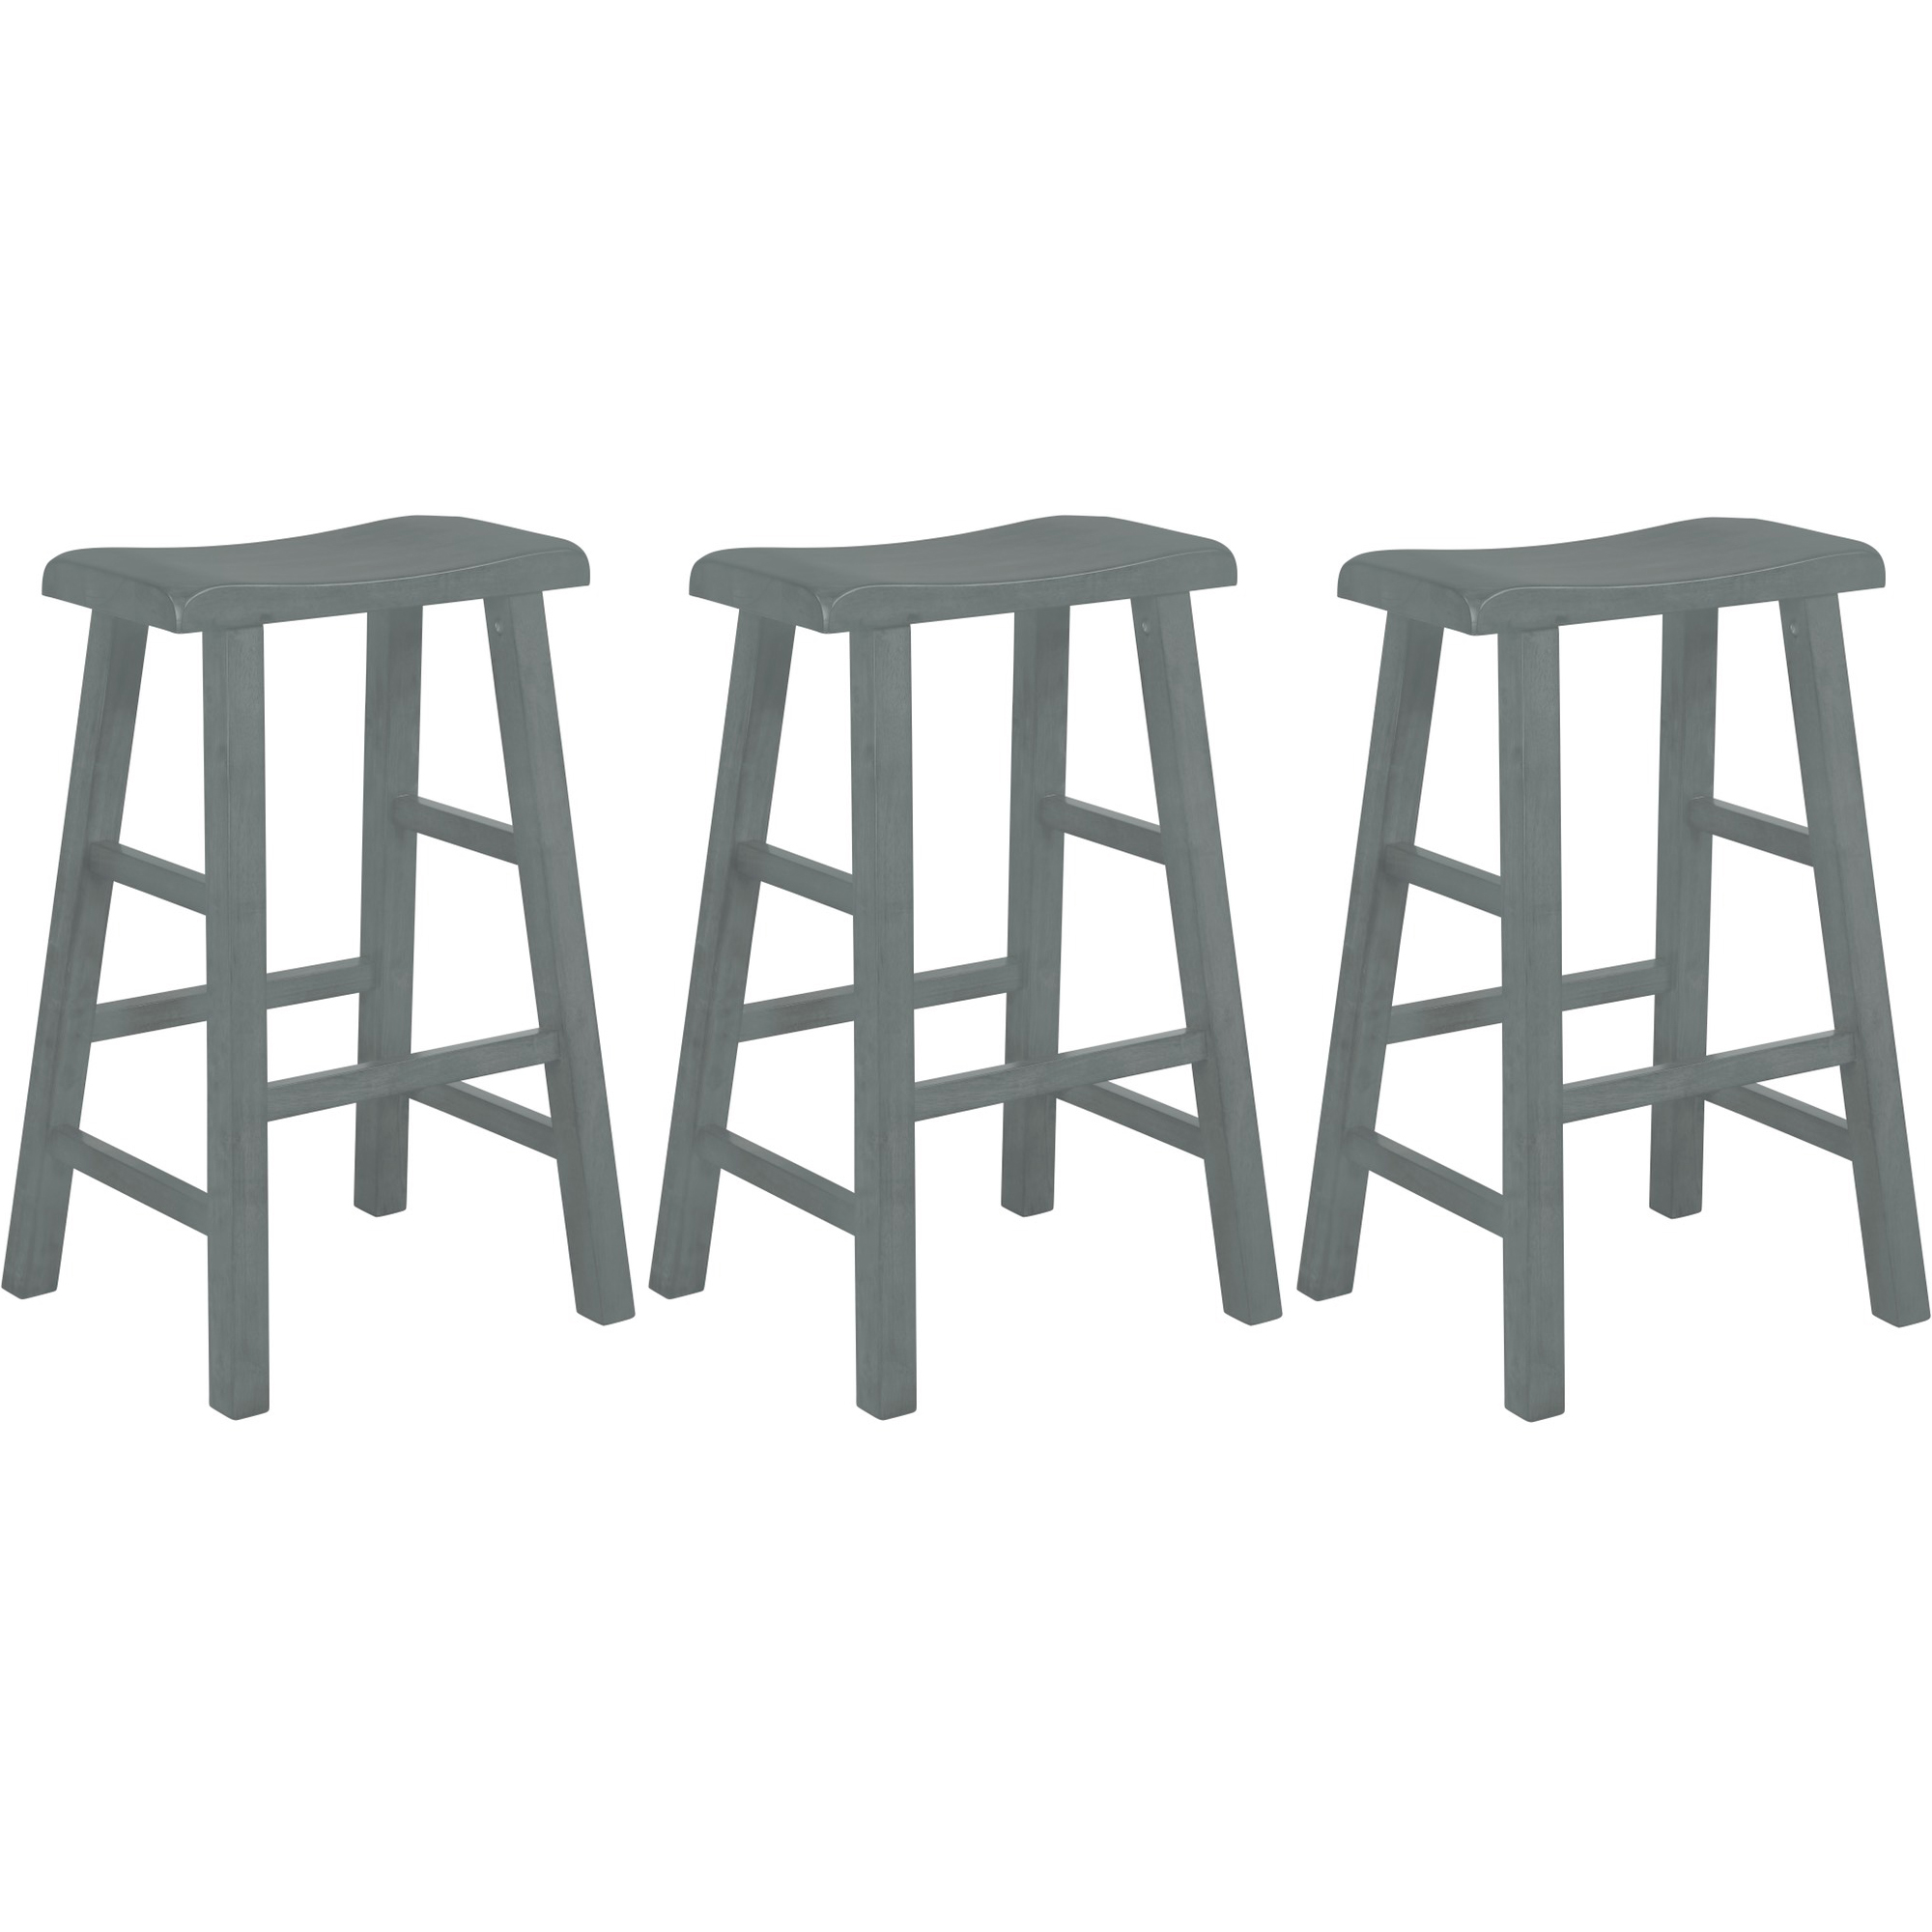 eHemco Heavy-Duty Solid Wood Saddle Seat Kitchen Counter Height Barstools, 29 Inches, Gray, Set of 3 - image 1 of 5